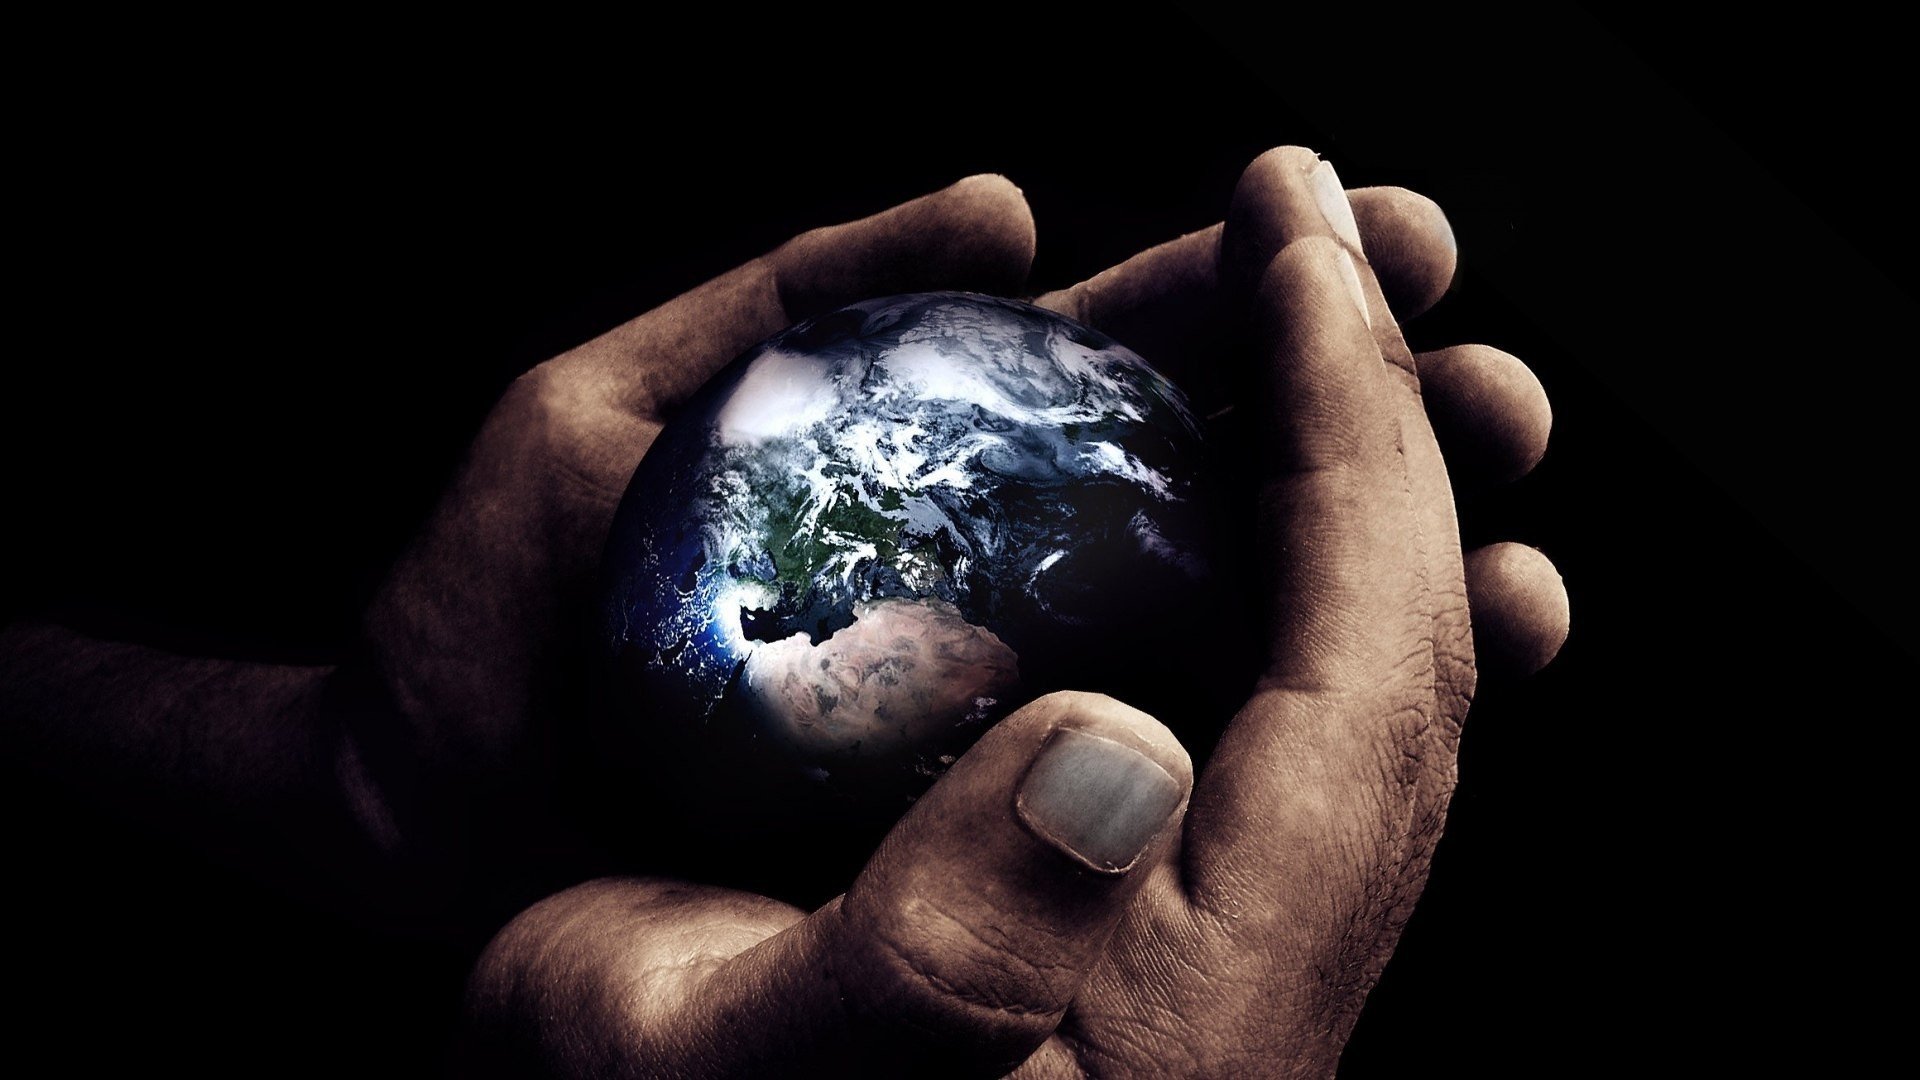 black background, Hand, Earth, Fingers, Miniatures, Photo manipulation Wallpaper